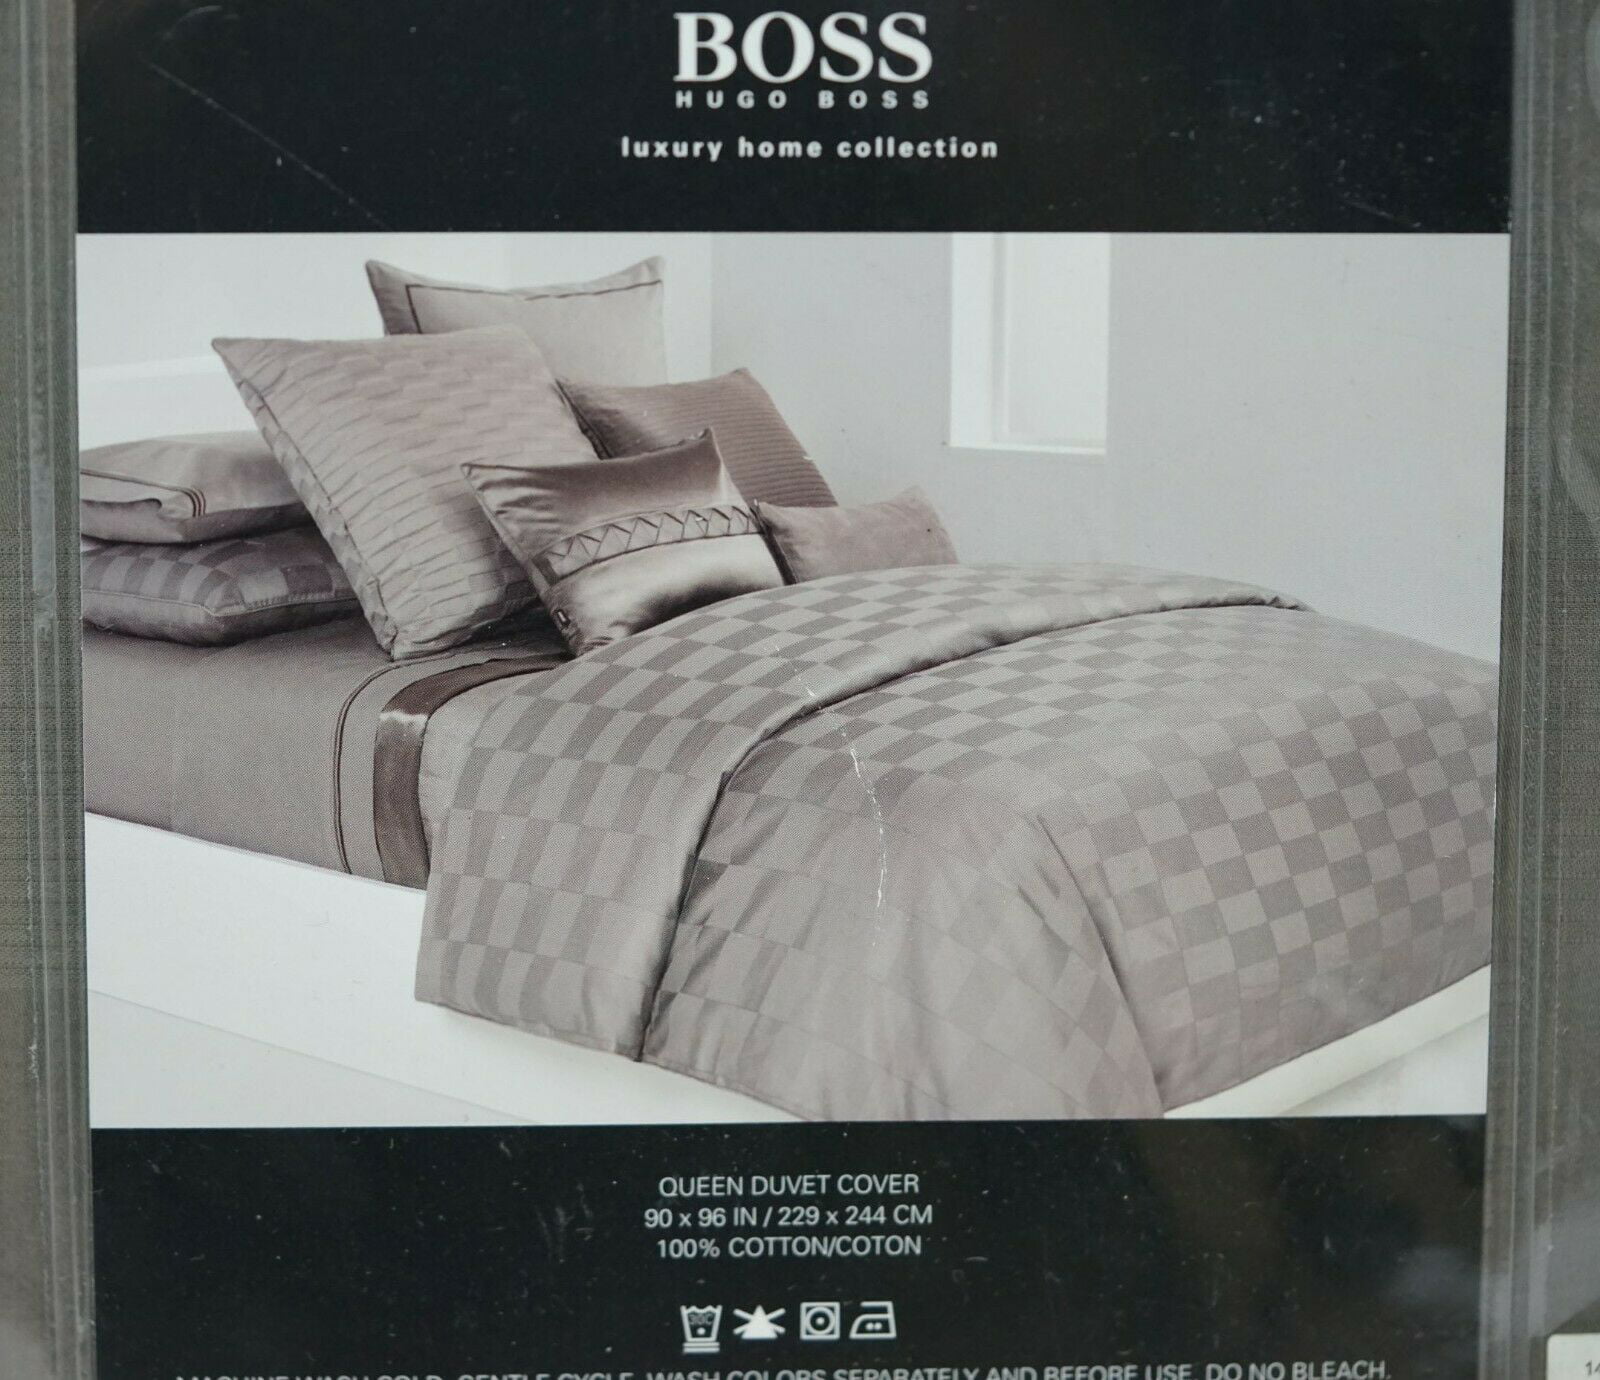 Mus hugo boss home collection 